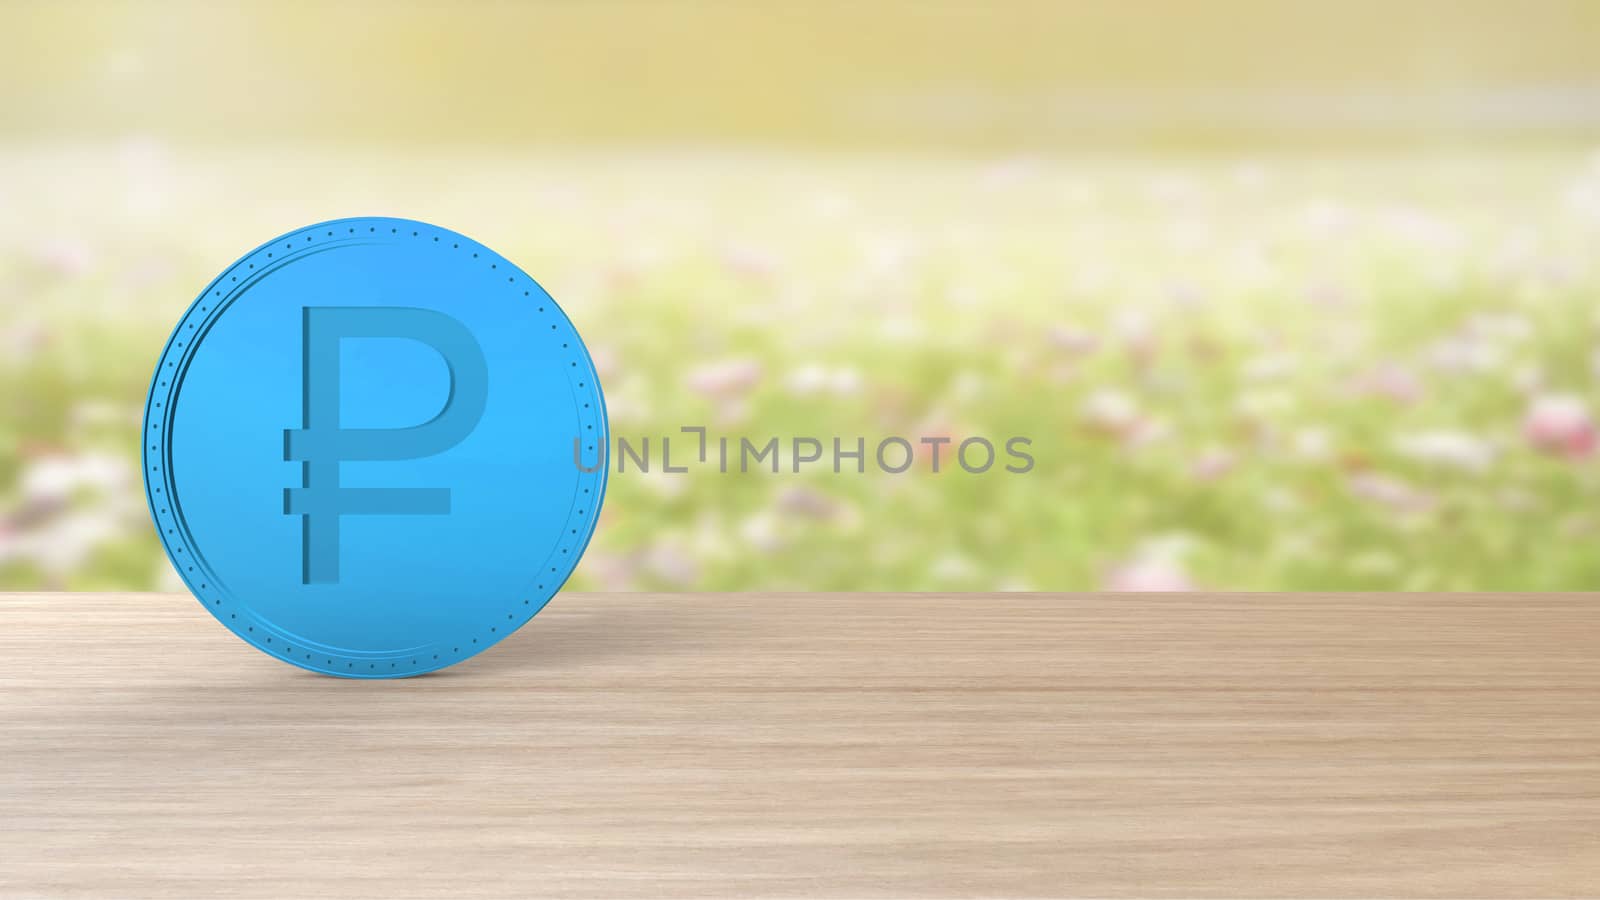 Blue ruble coin Isolated on blur field of flowers background. 3d render isolated illustration, business, management, risk, money, cash, growth, banking, bank, finance, symbol.